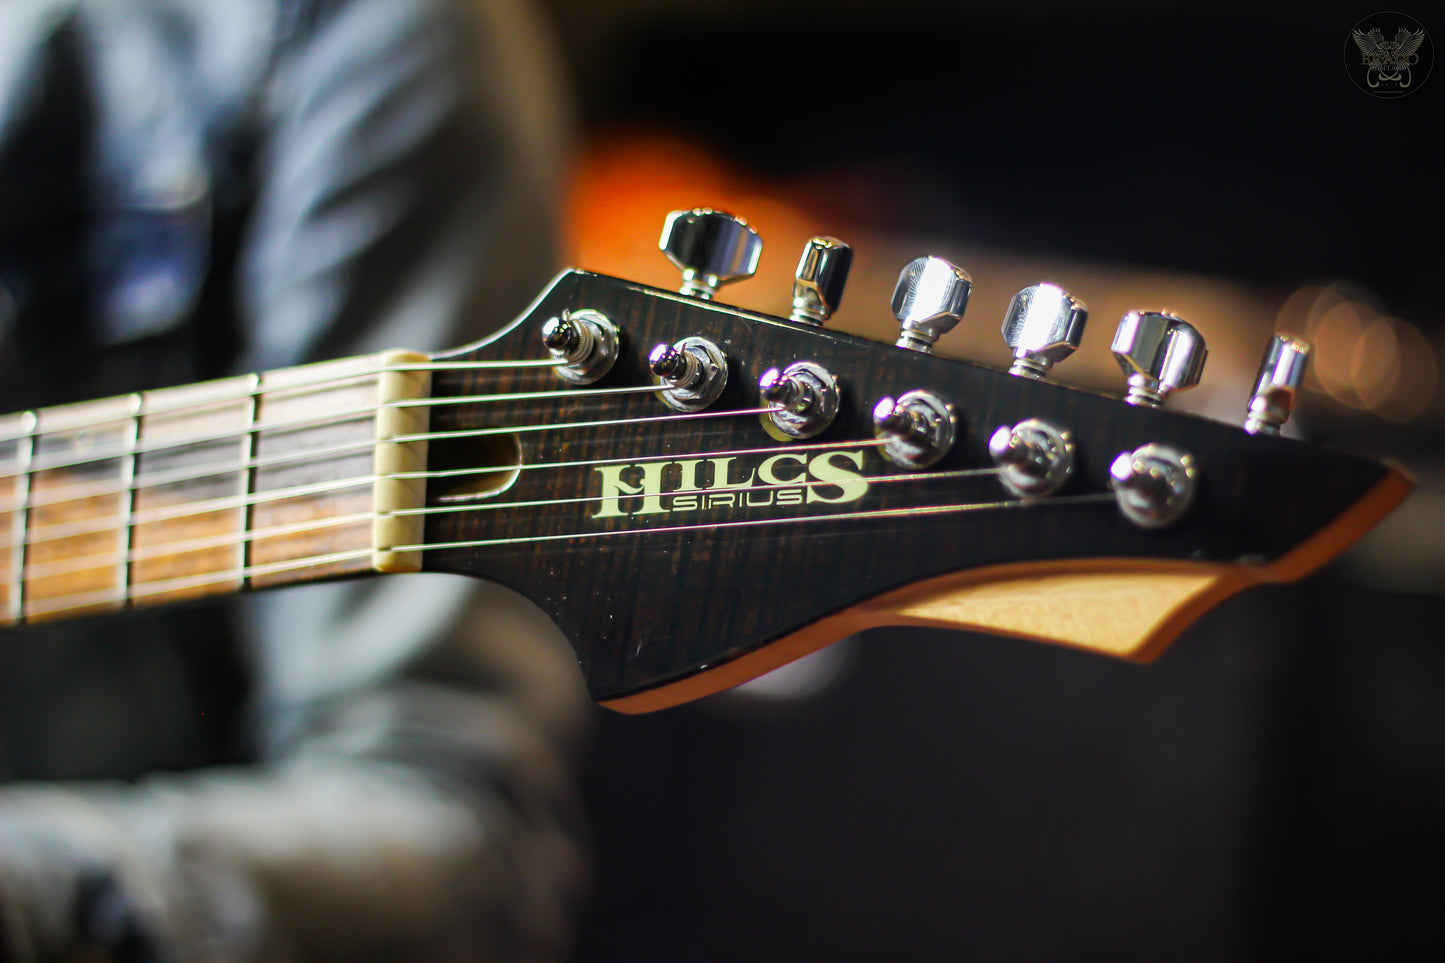 HILCS SIRIUS HANDCRAFTED IN MALAYSIA (MINT)